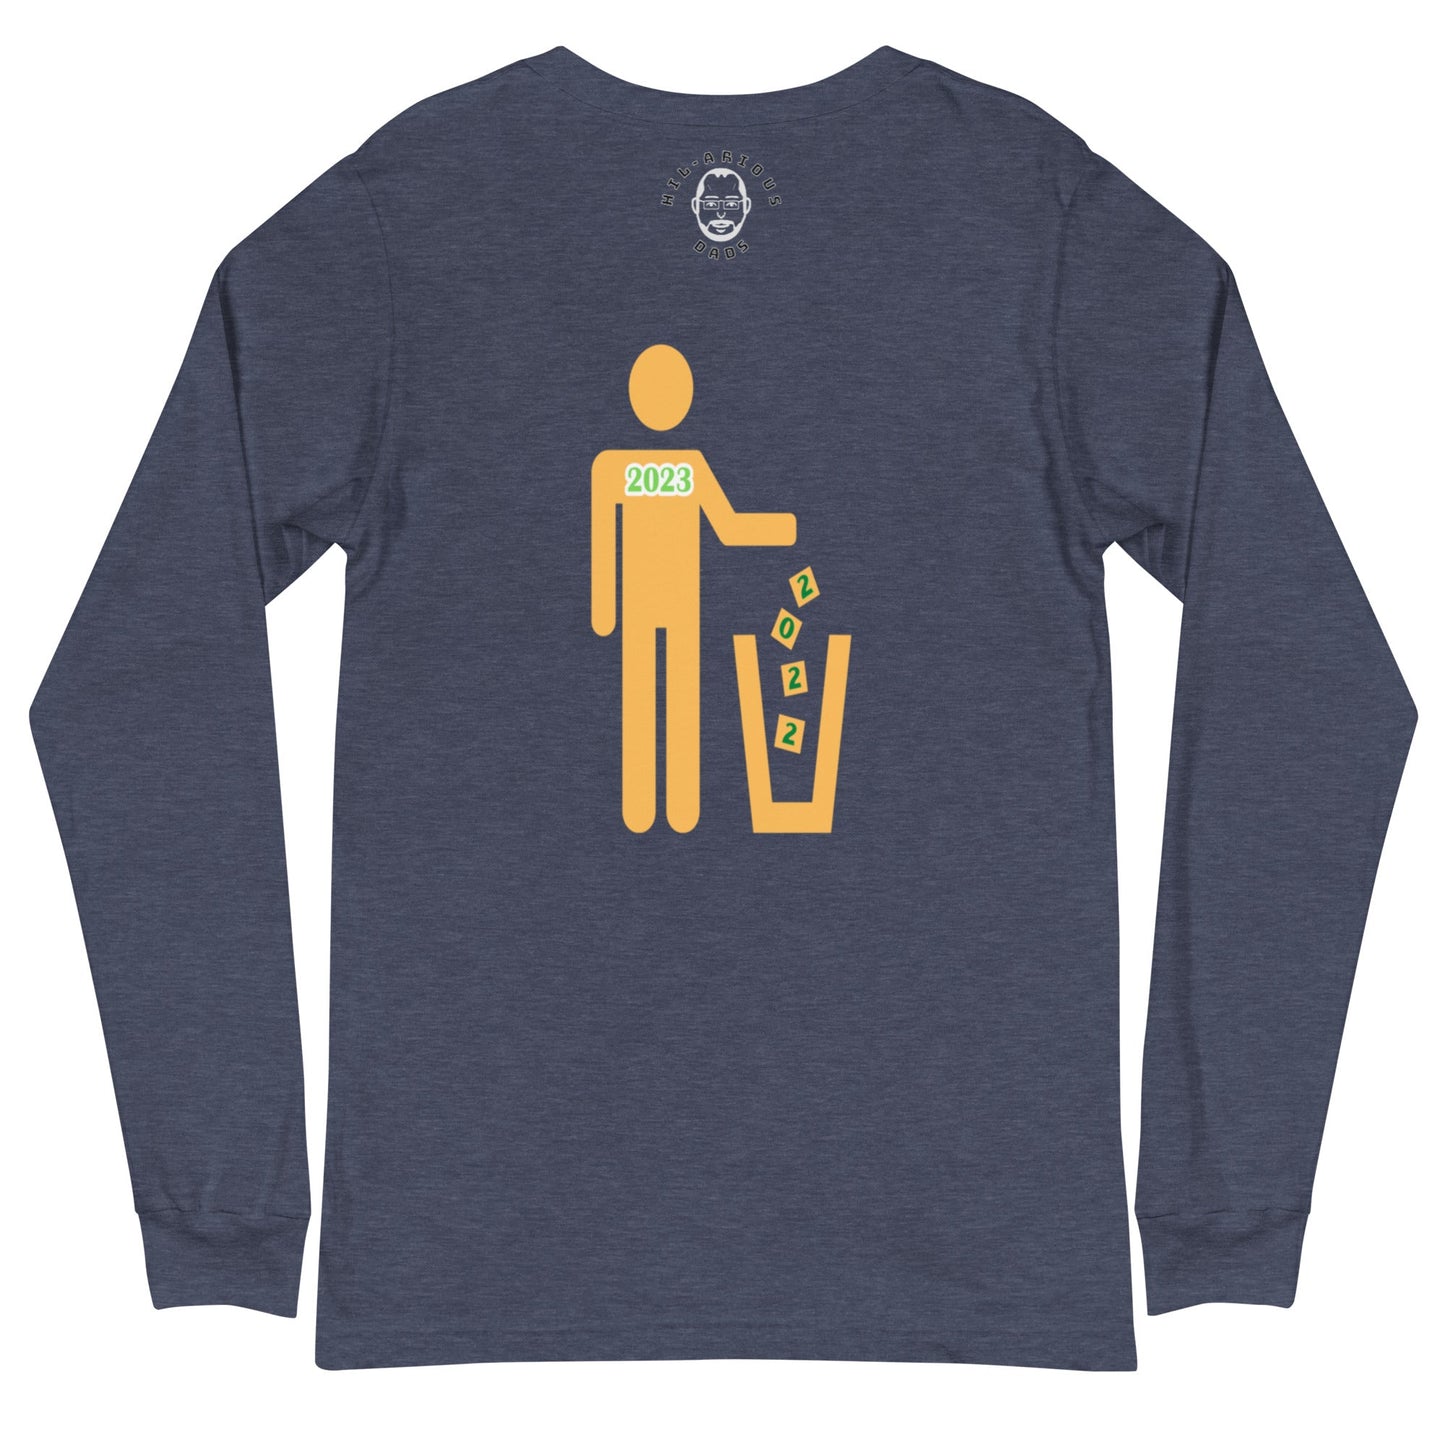 New Year? I just got used to this last one!-Long Sleeve Tee - Hil-arious Dads